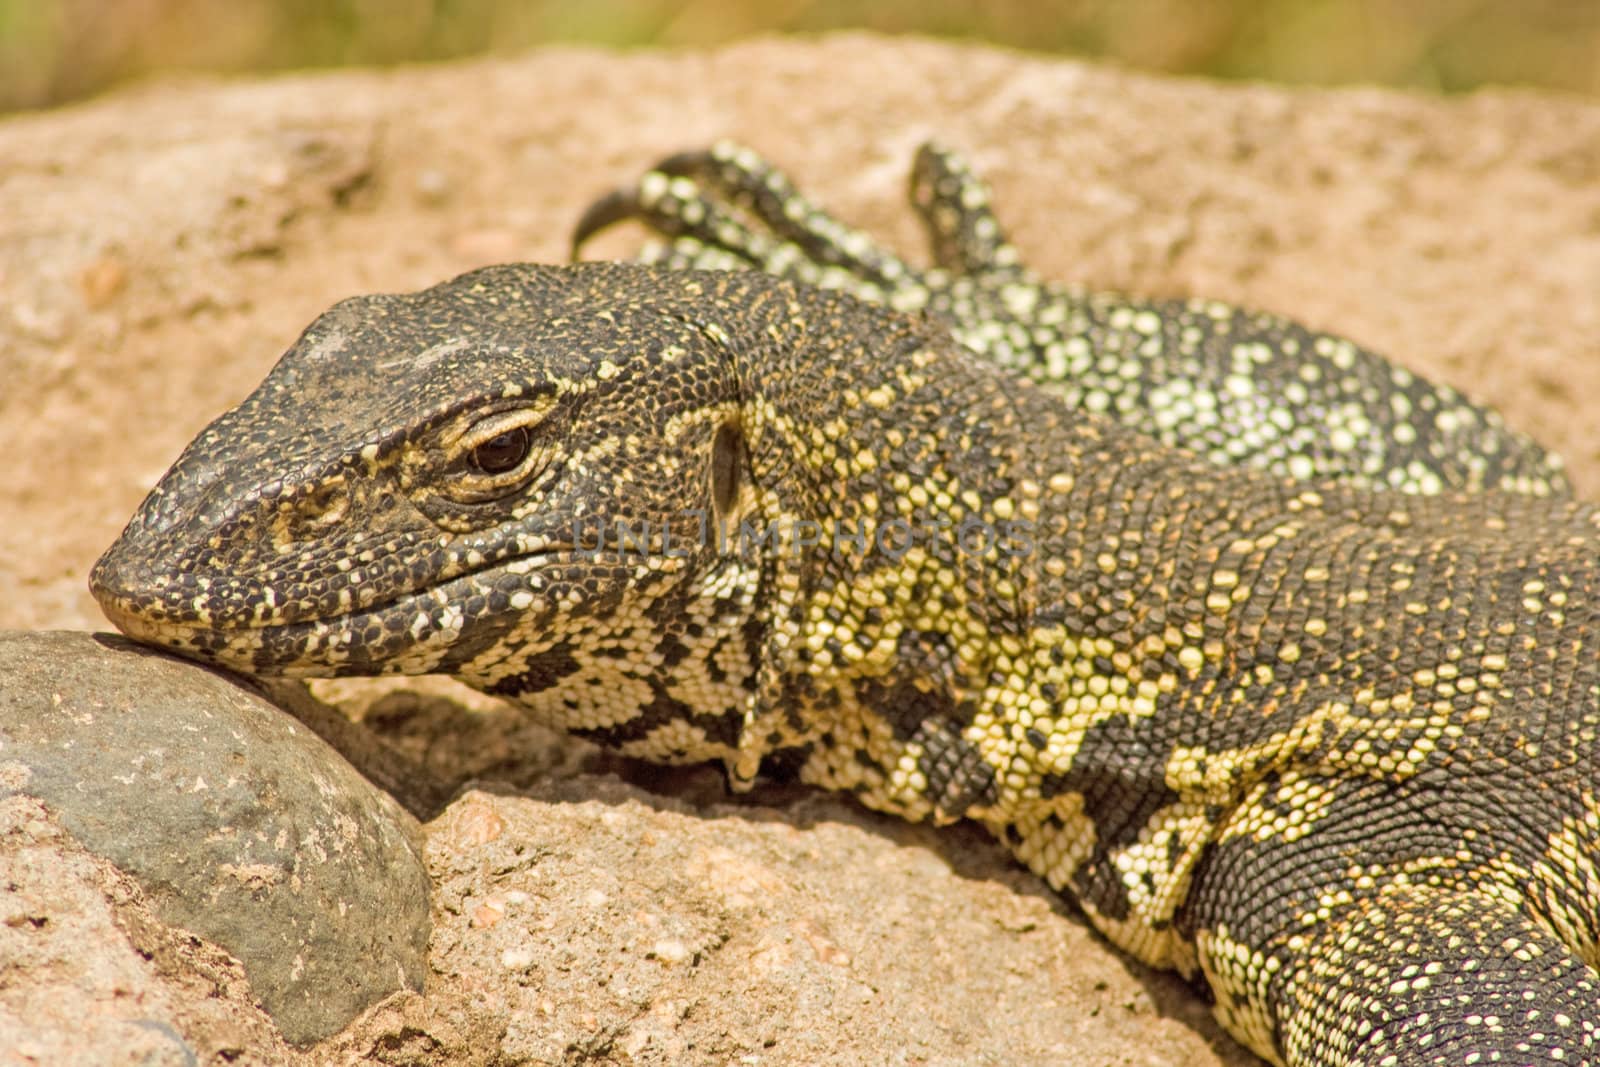 Nile Monitor (Varanus niloticus) photographed in Kruger National Park, South Africa.